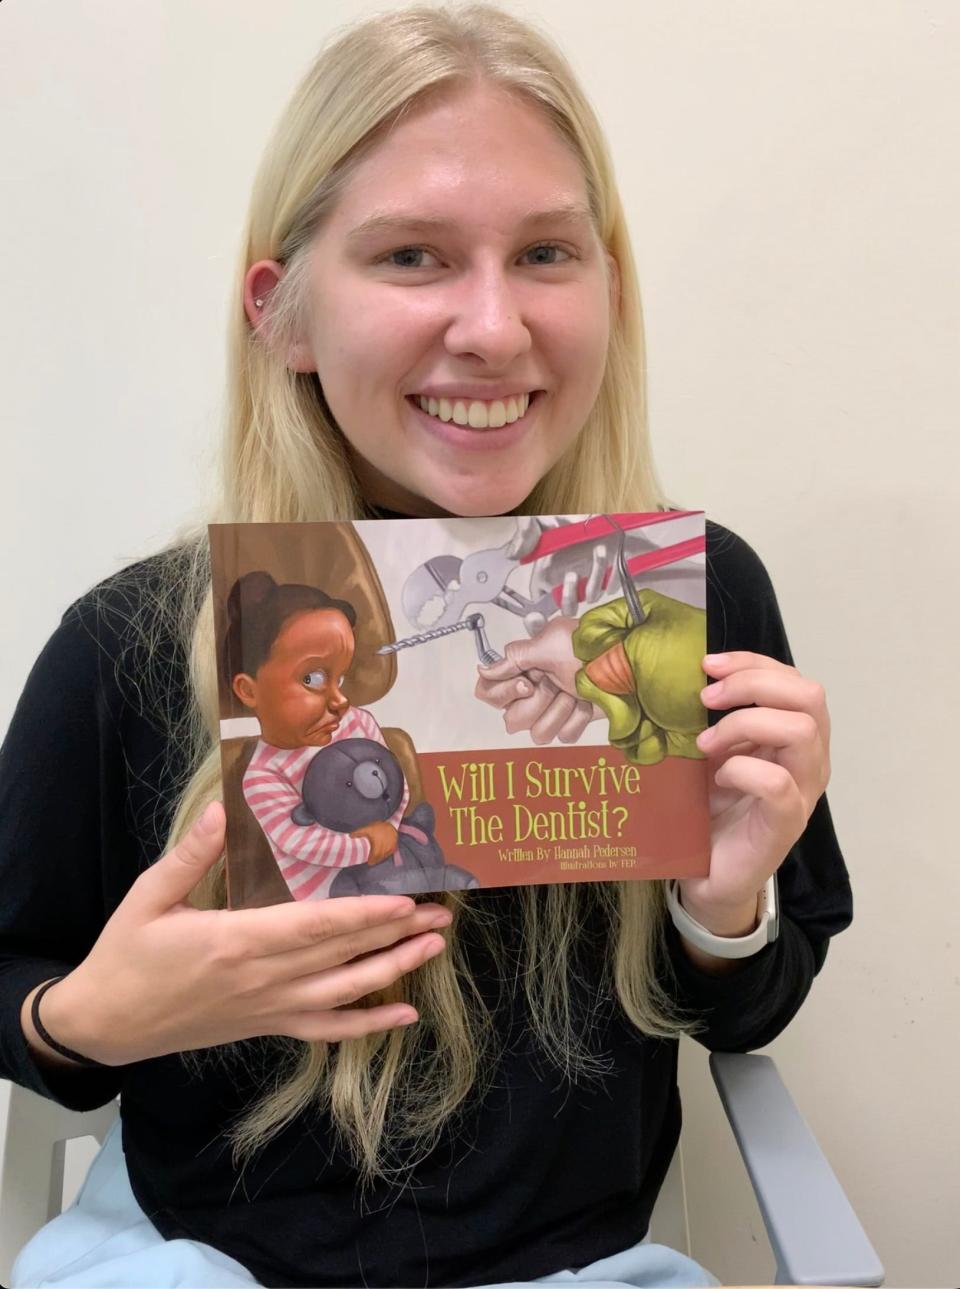 Hannah Rose Pedersen displays her book, "Will I Survive the Dentist?" Pedersen is hoping to be admitted to IUPUI's dentistry school in December.